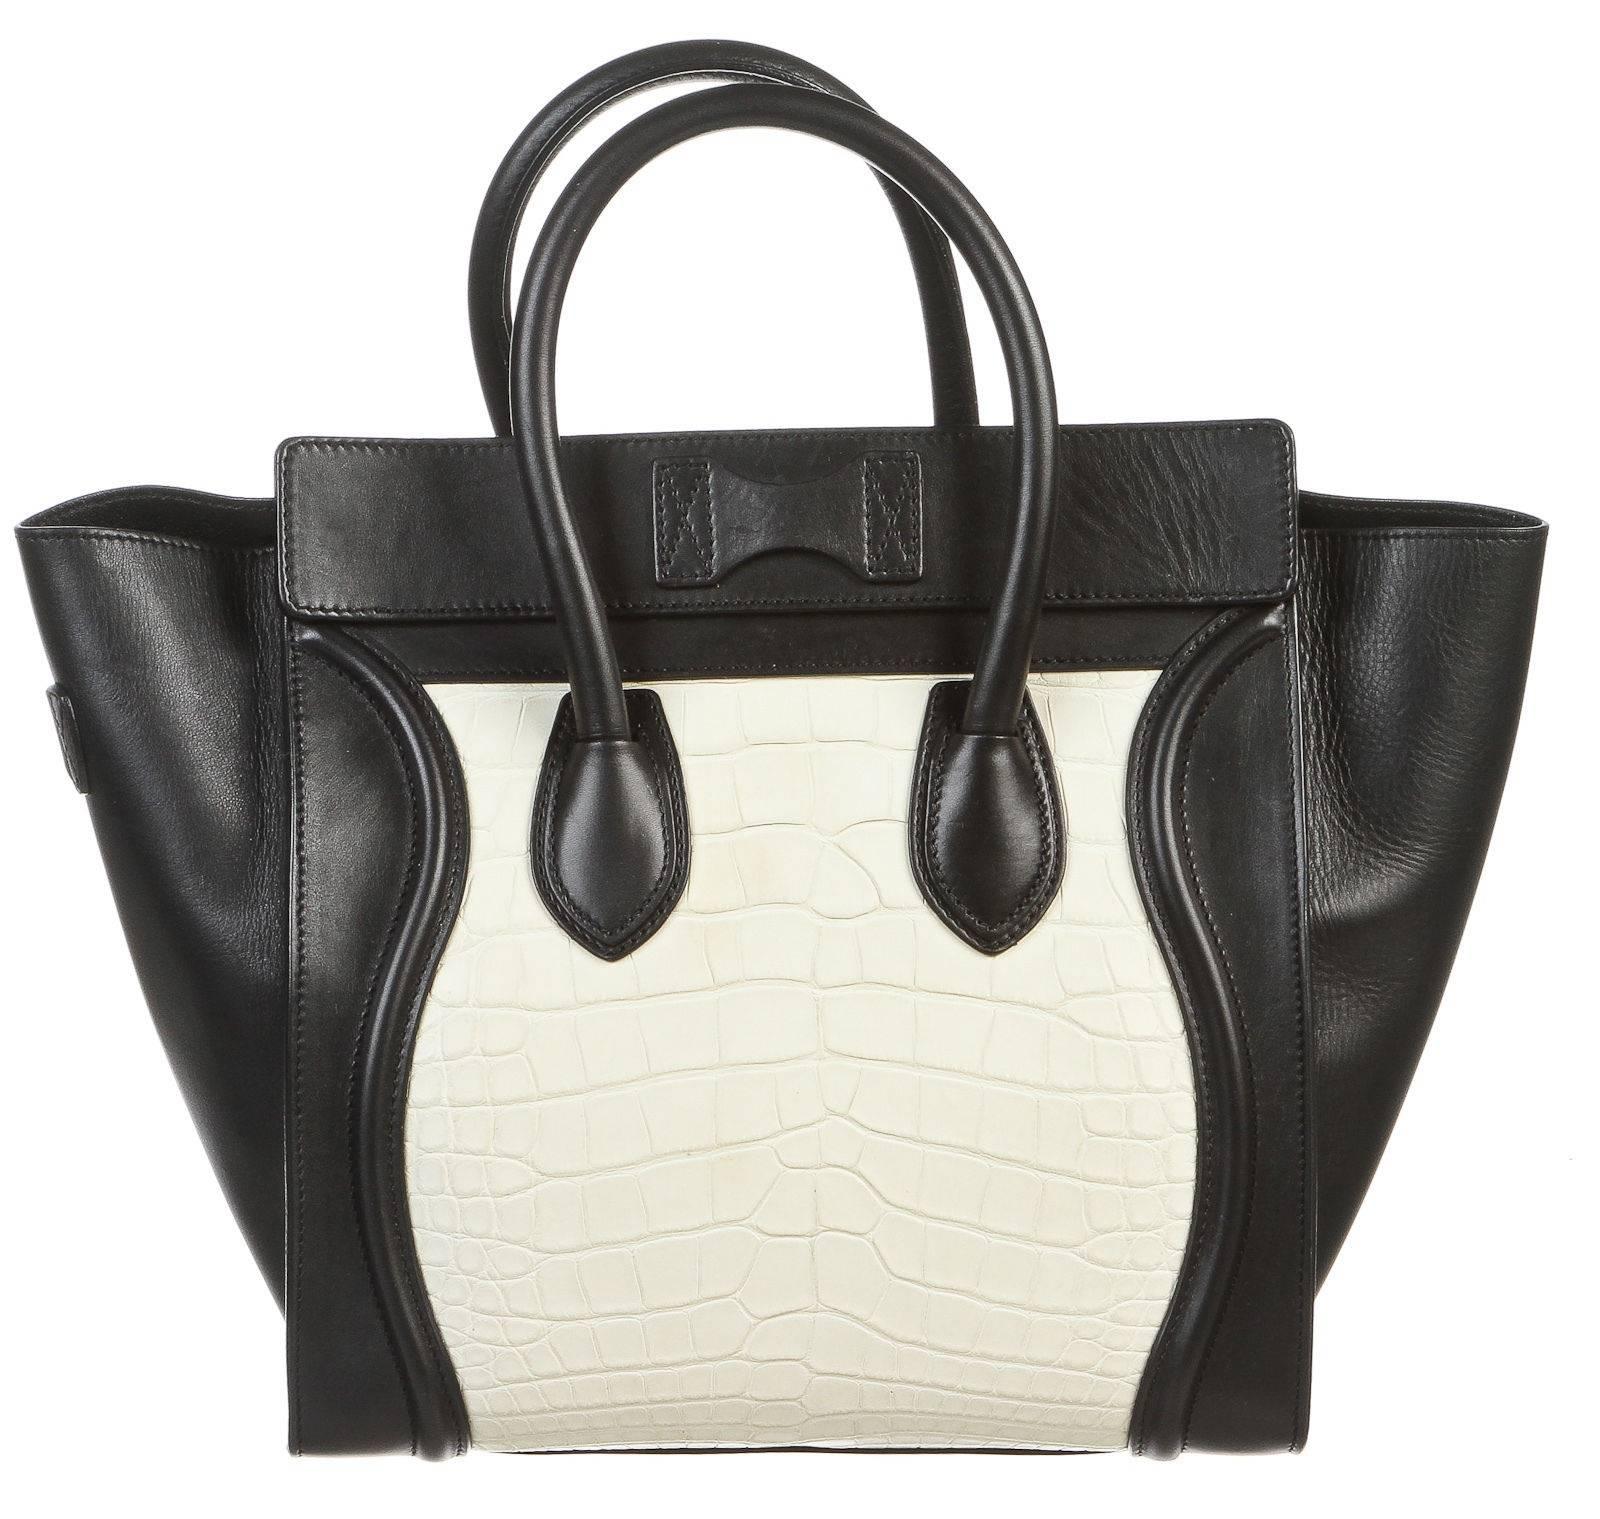 Featured here is a fabulous Celine medium luggage handle handbag. This bag is IT handbag to own and coveted by many. This bag features dual top handles that are smooth and easy to carry. It is a wonderful size for an everyday bag or an ideal evening